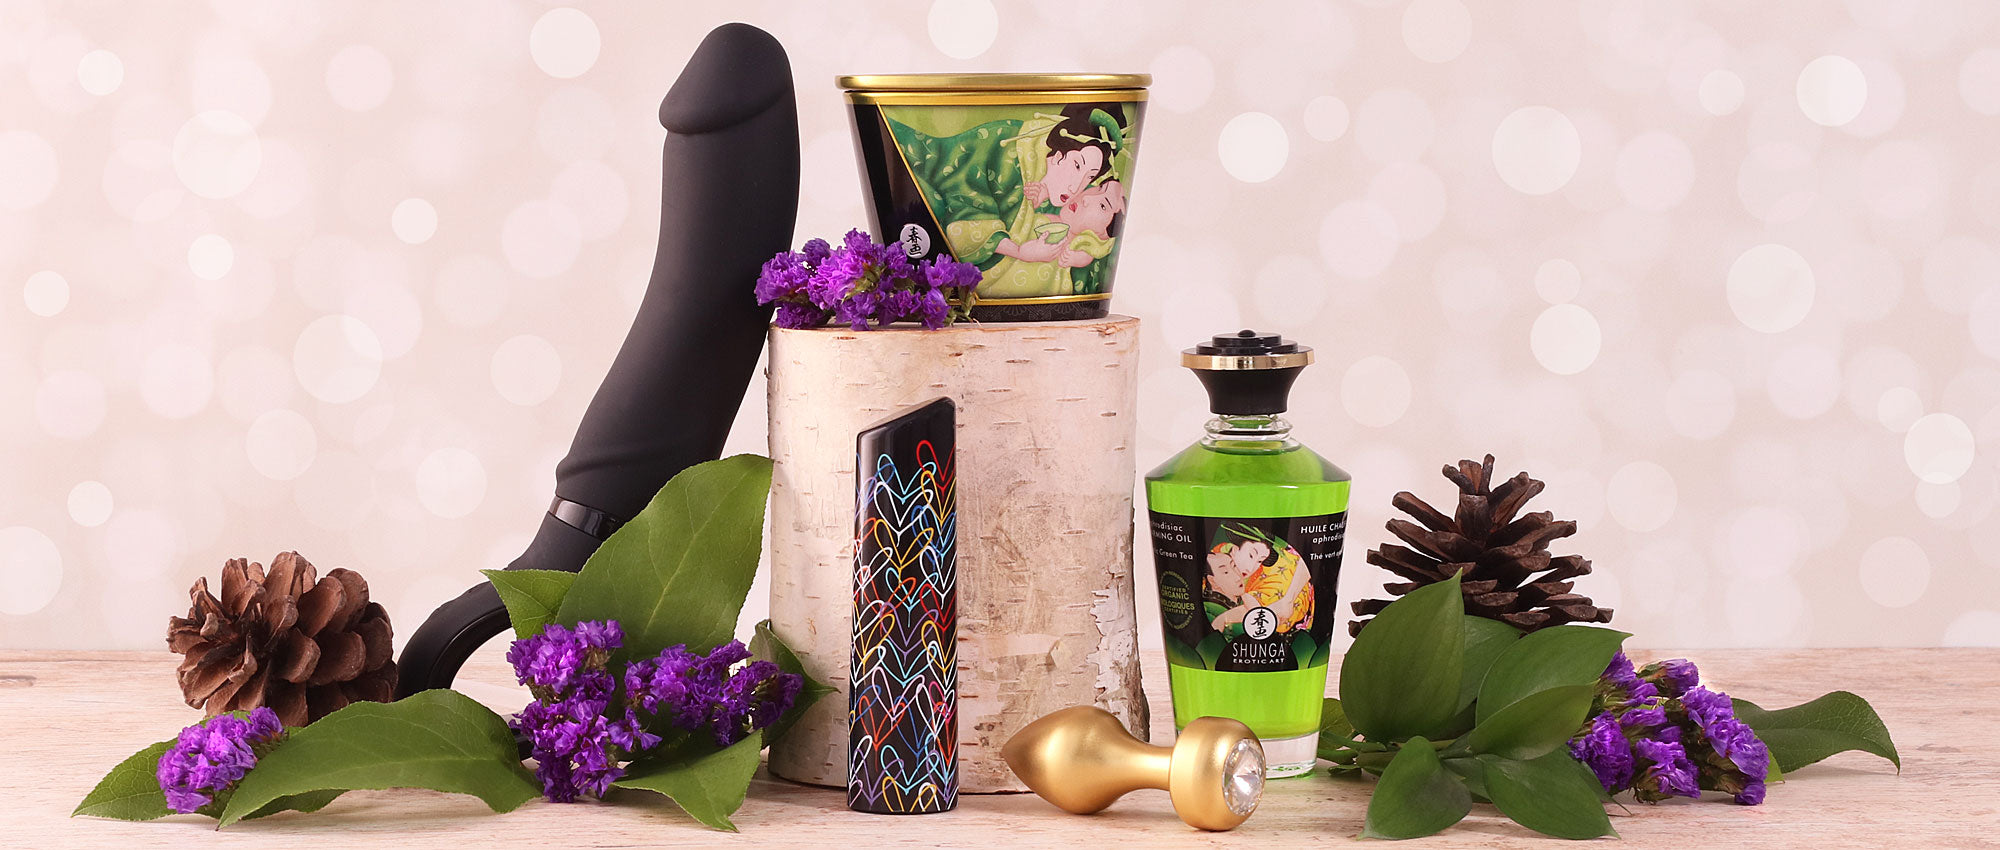 Sex toys, lubricant, massage candle, pine cones, leaves, flowers